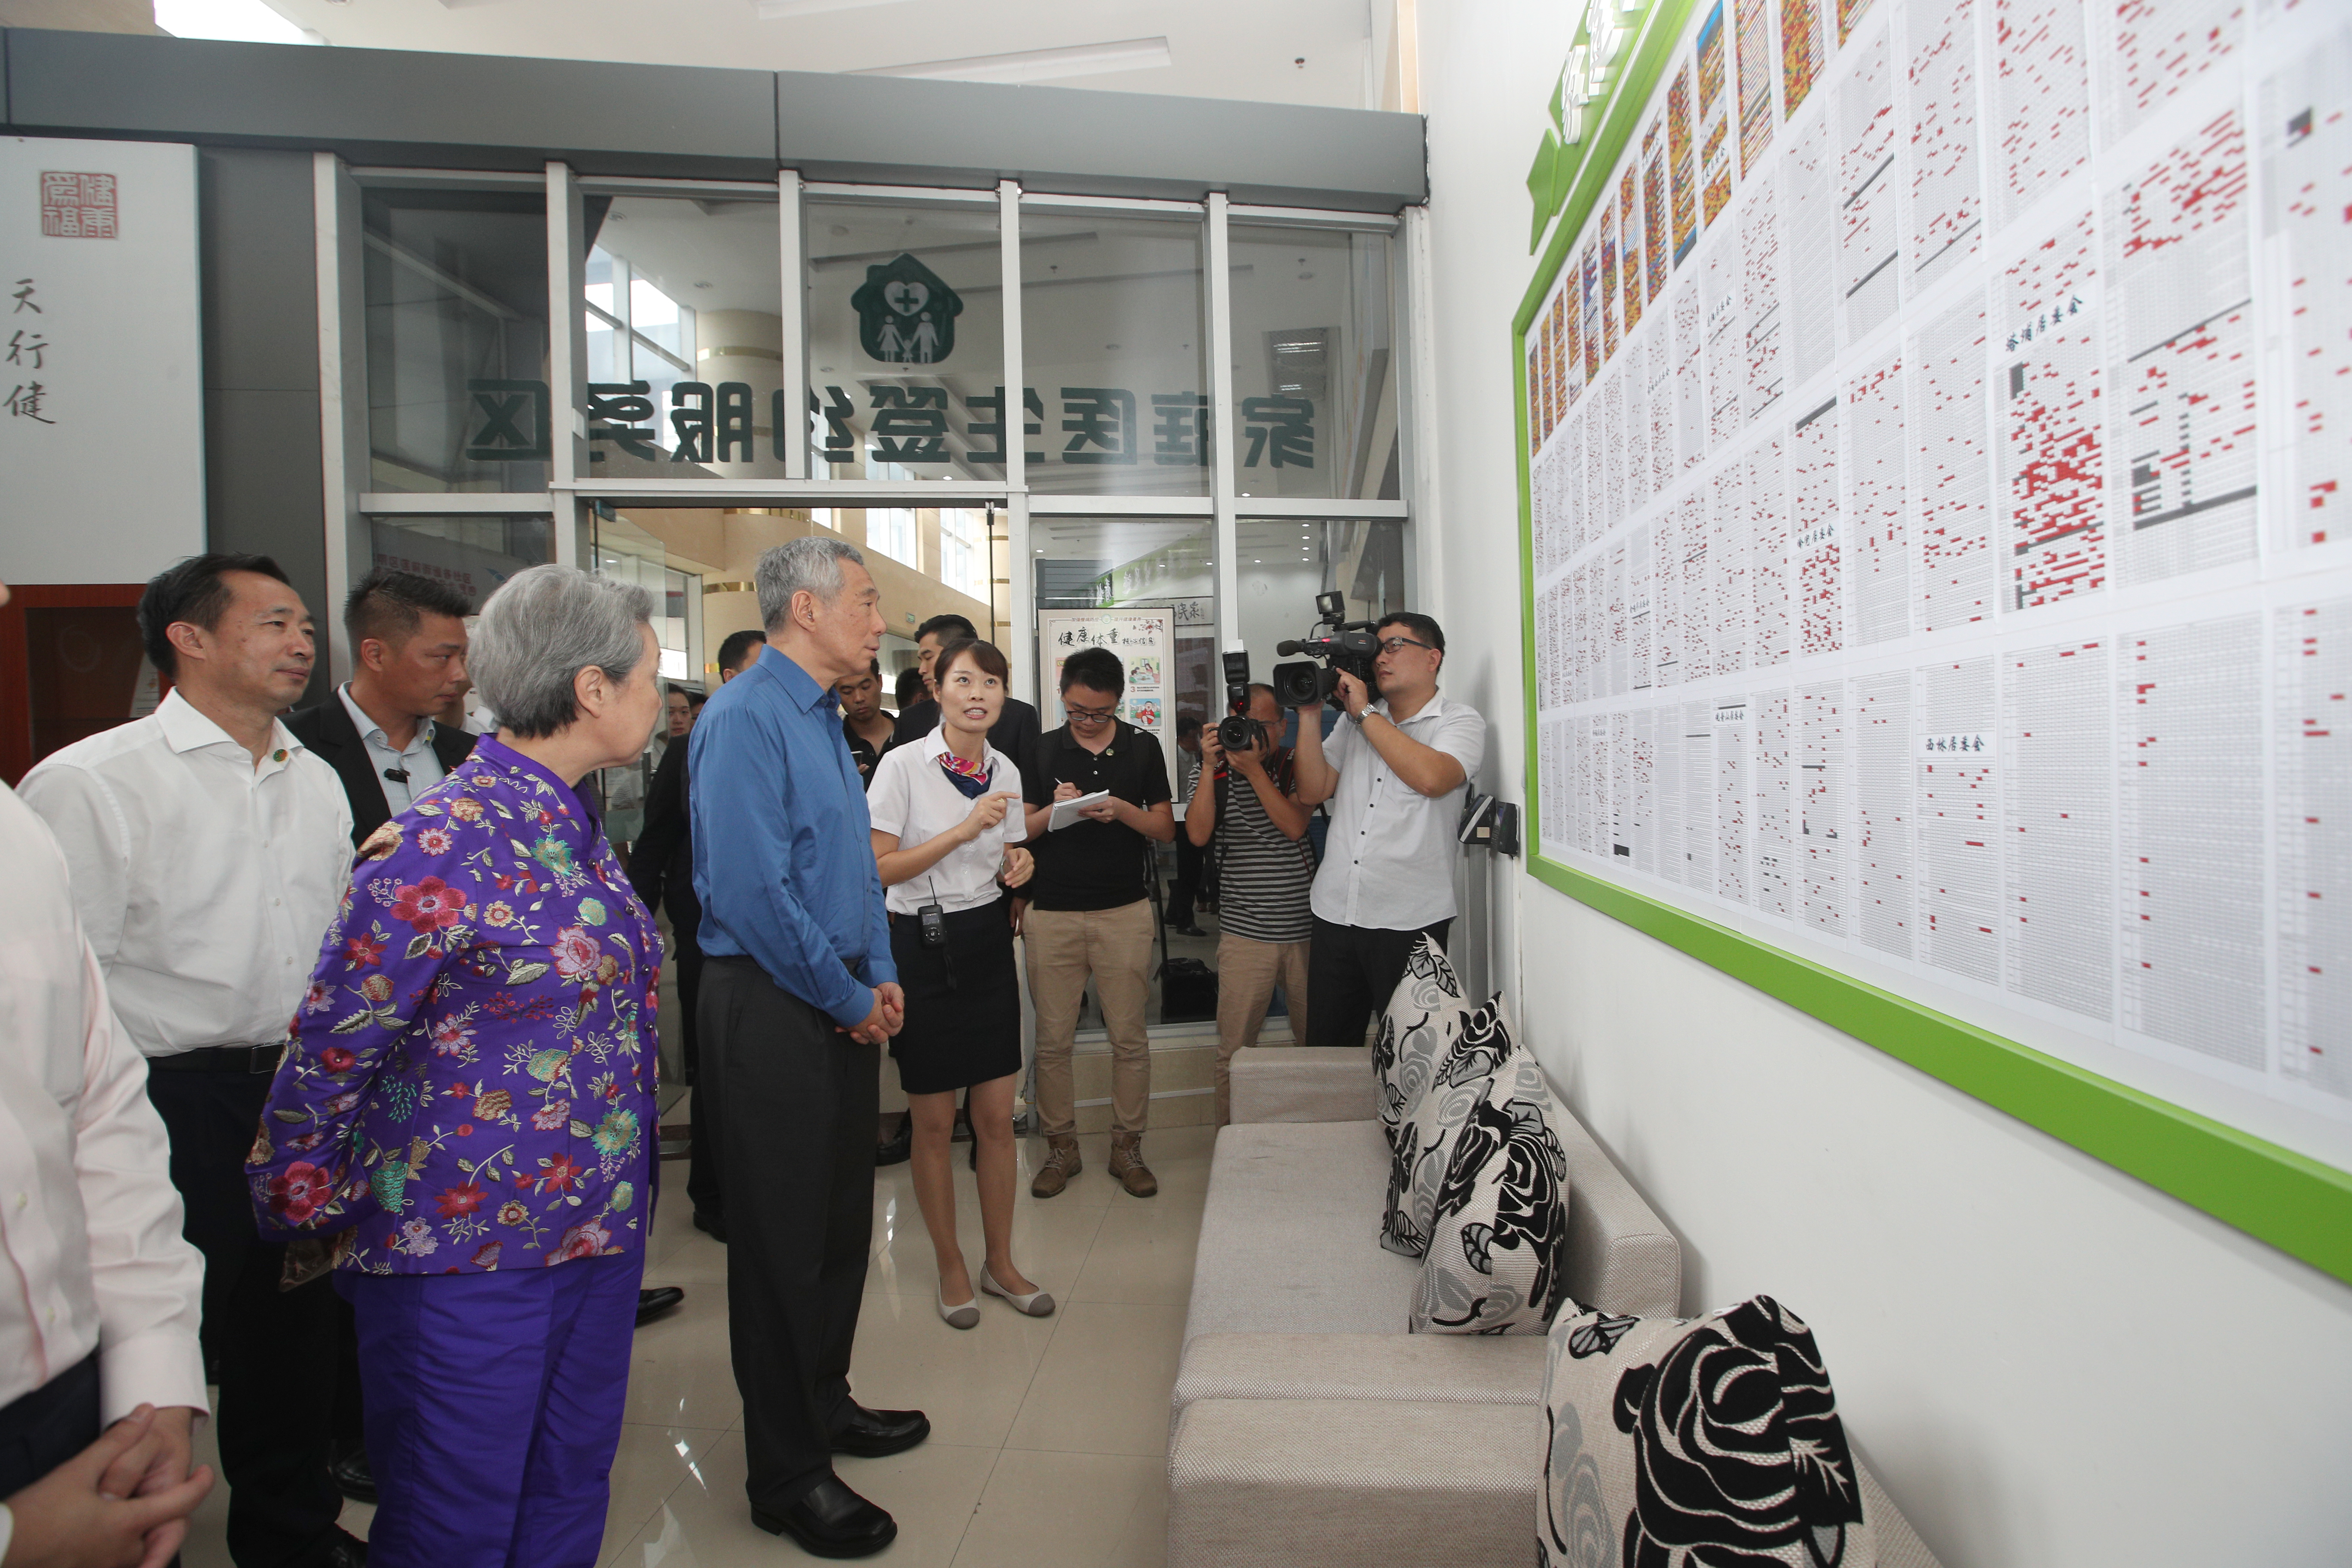 PM Lee Hsien Loong visiting Fujian (Xiamen)-Singapore Friendship Polyclinic in Xiamen on 21 Sep 2017 (MCI Photo by Chwee)